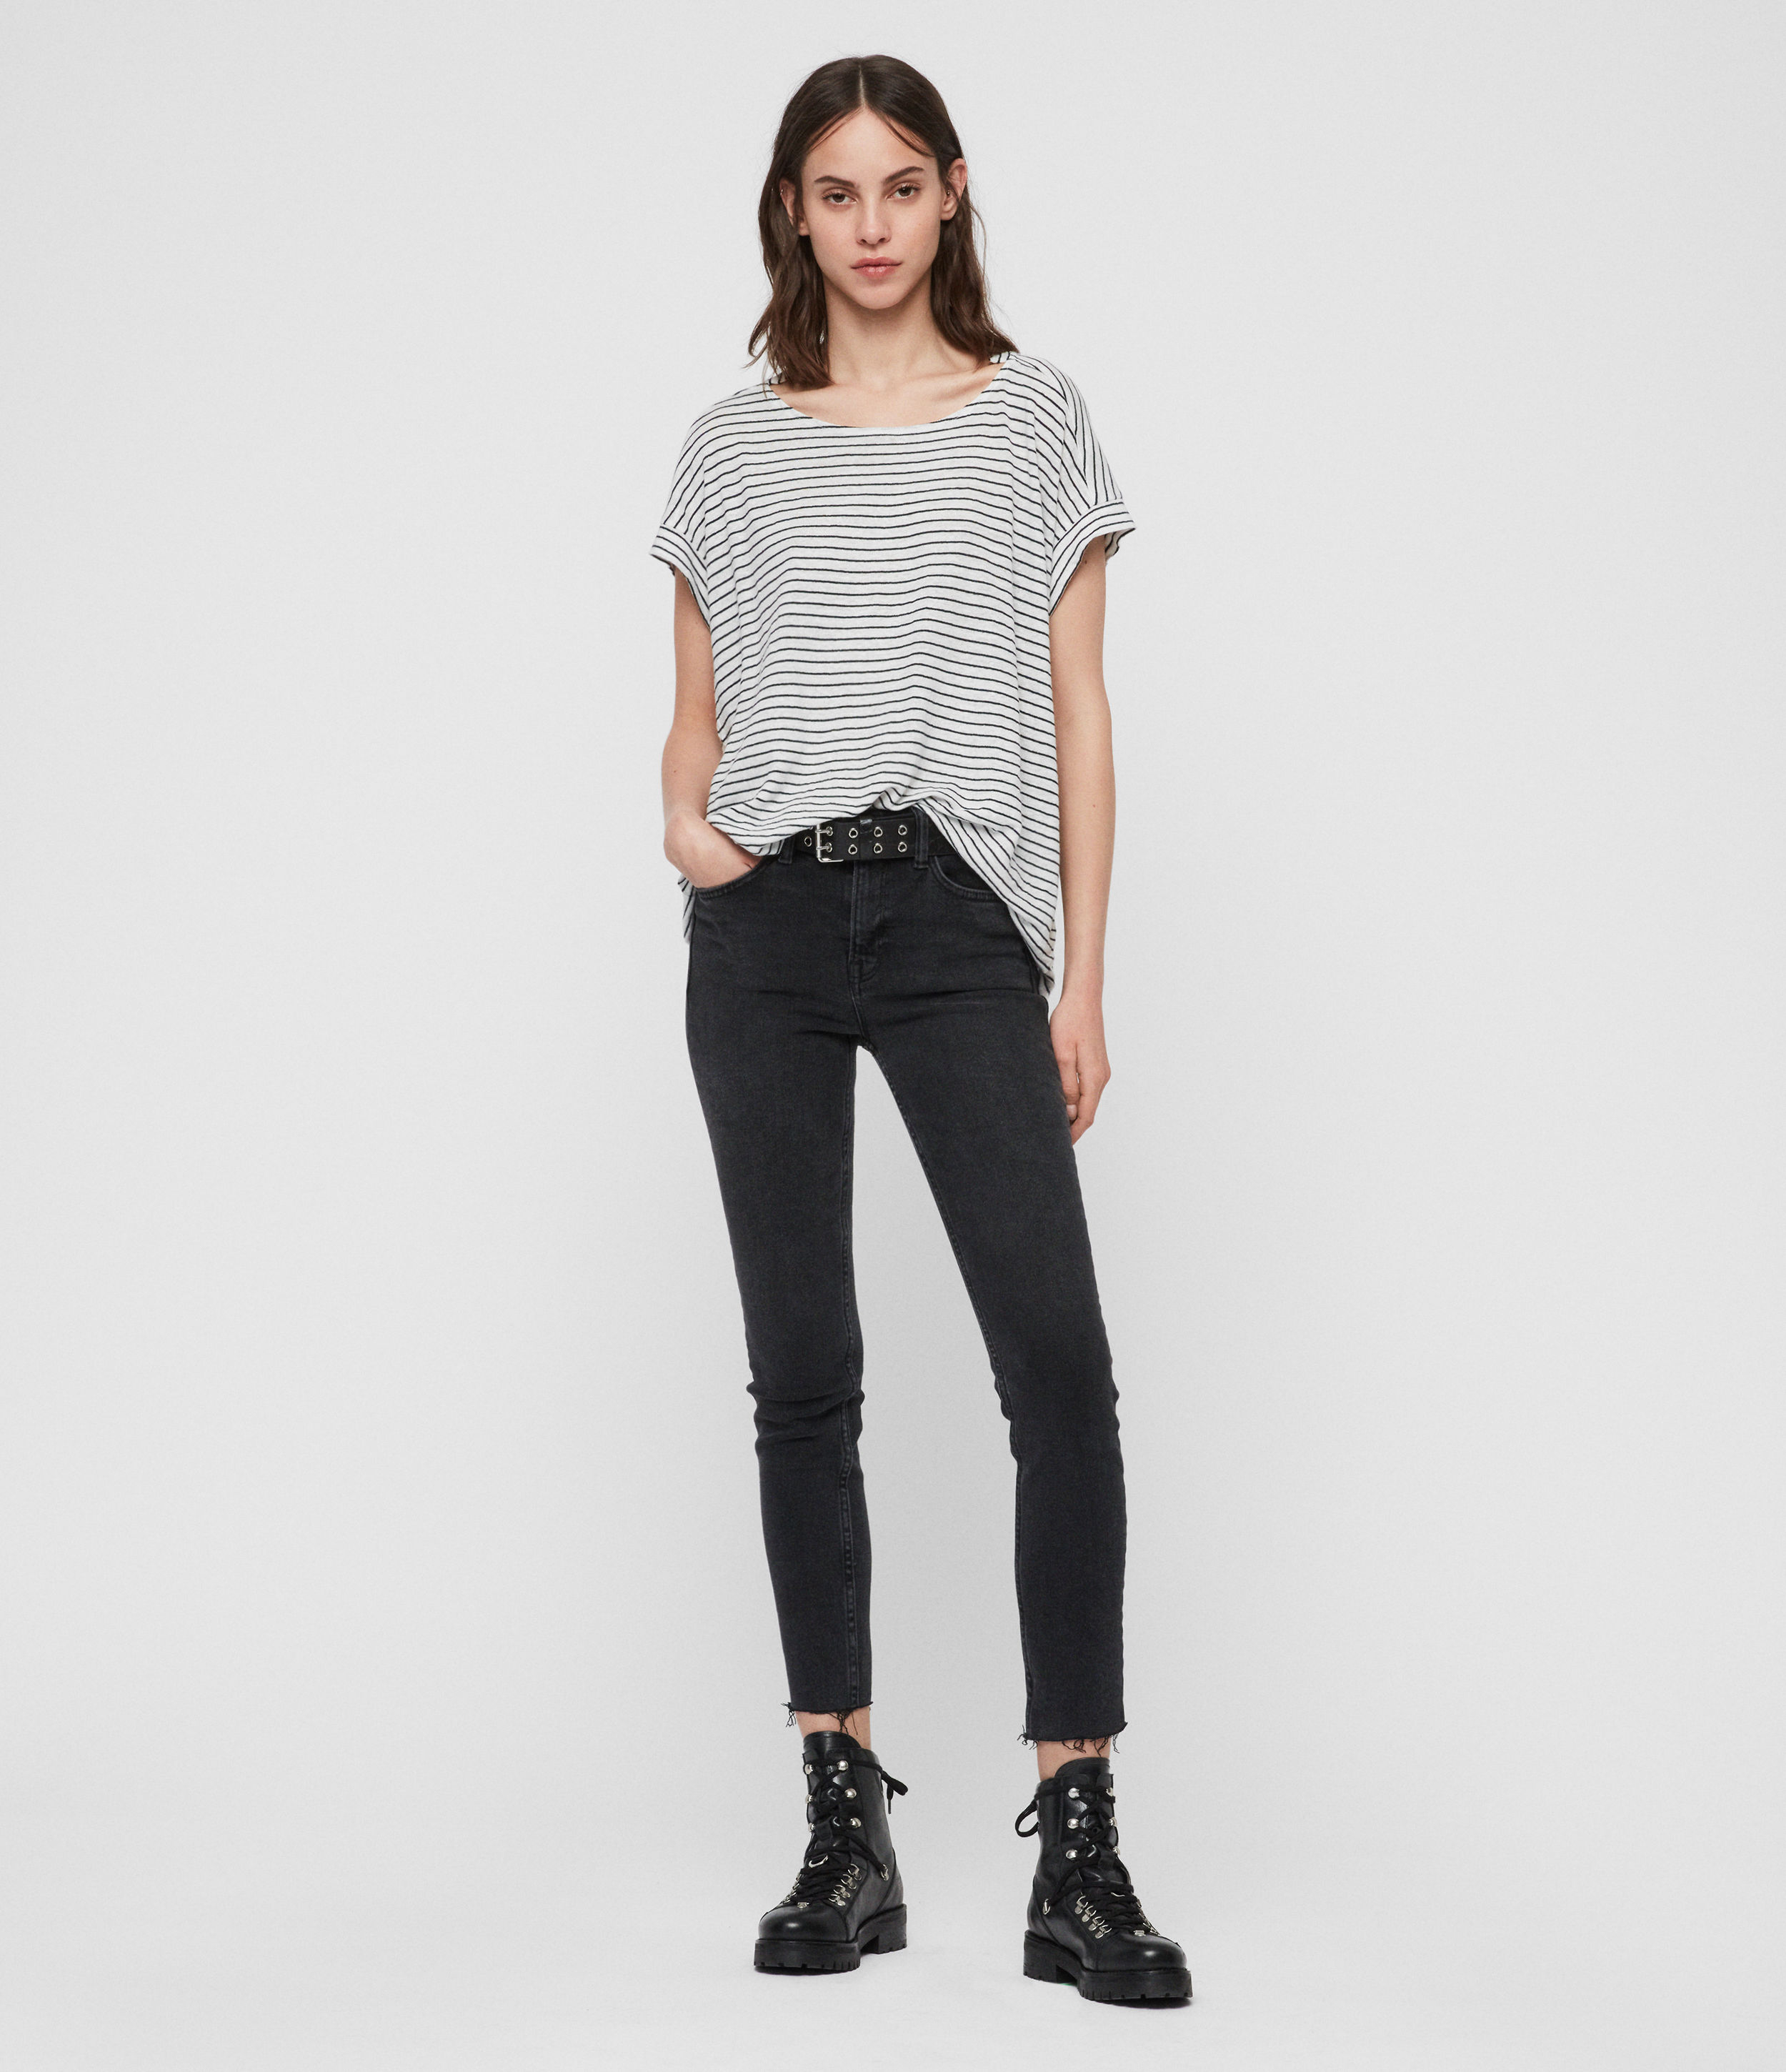 Allsaints Womens Pina Stripe T-shirt In White And Navy Blue